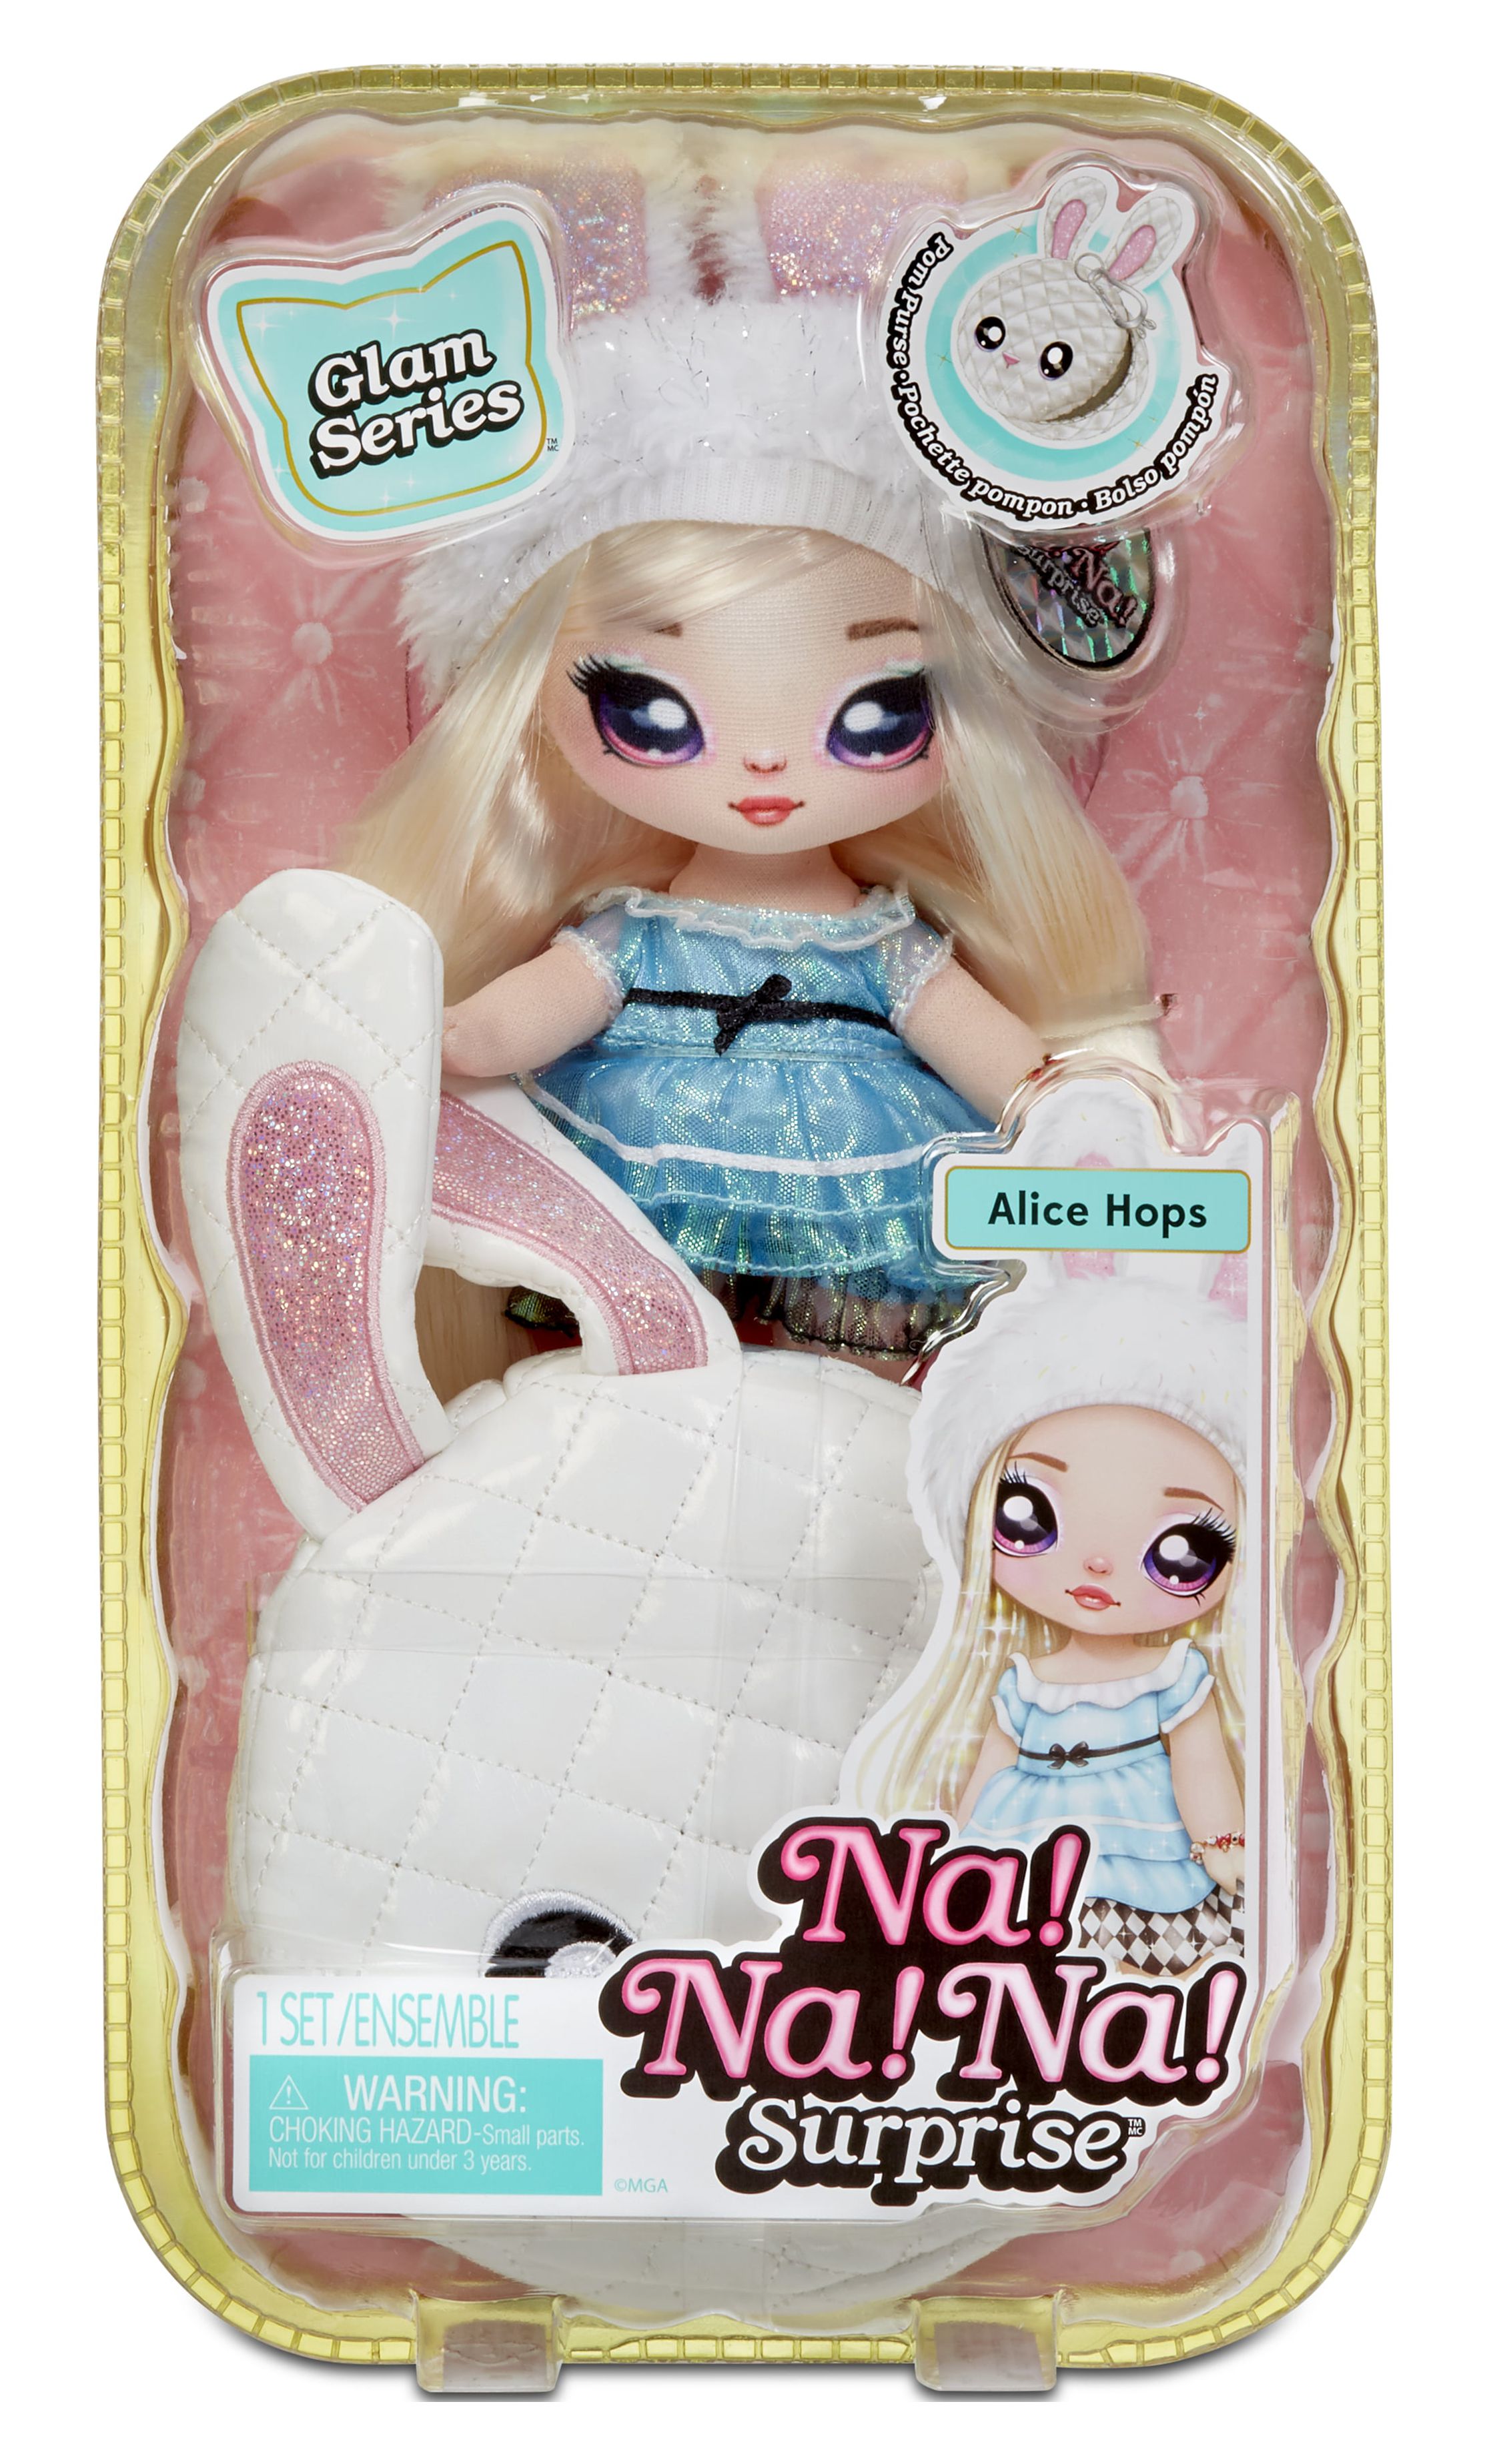 Na Na Na Surprise Glam Series Alice Hops Blonde Fashion Doll with Purse - image 4 of 6